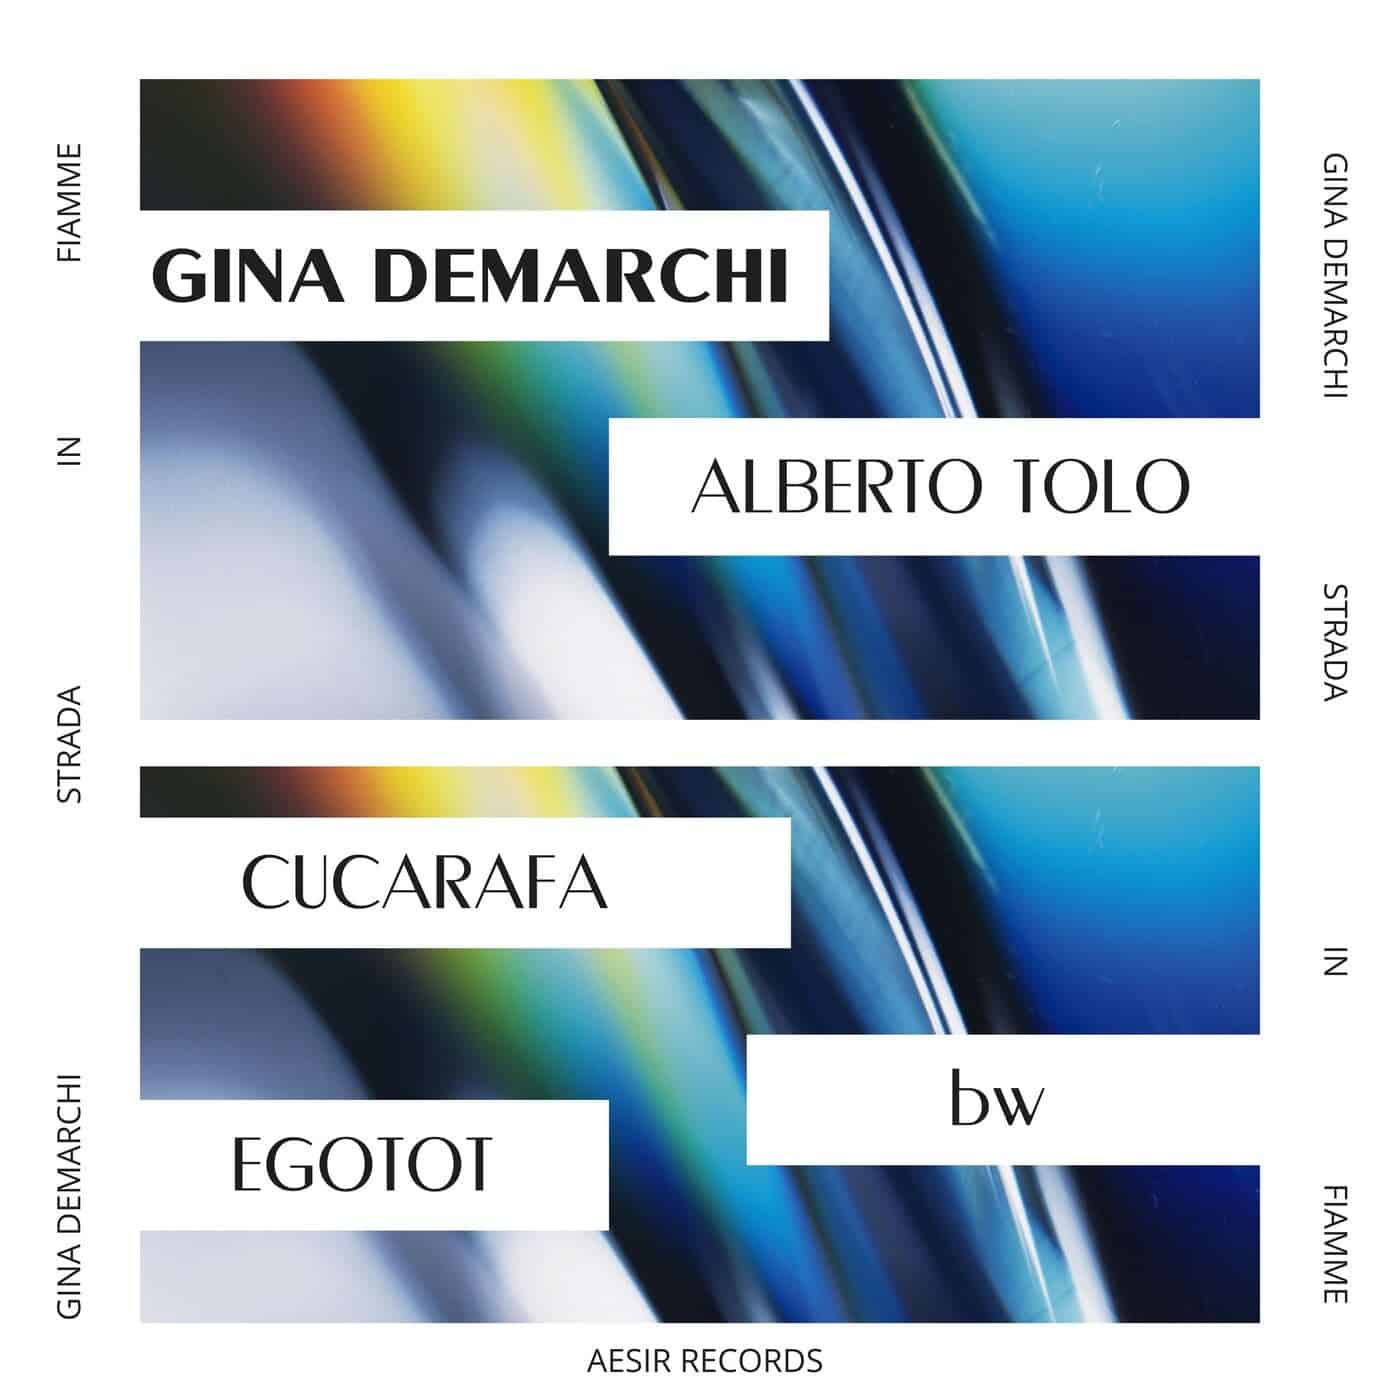 Download Gina Demarchi - Strada In Fiamme on Electrobuzz